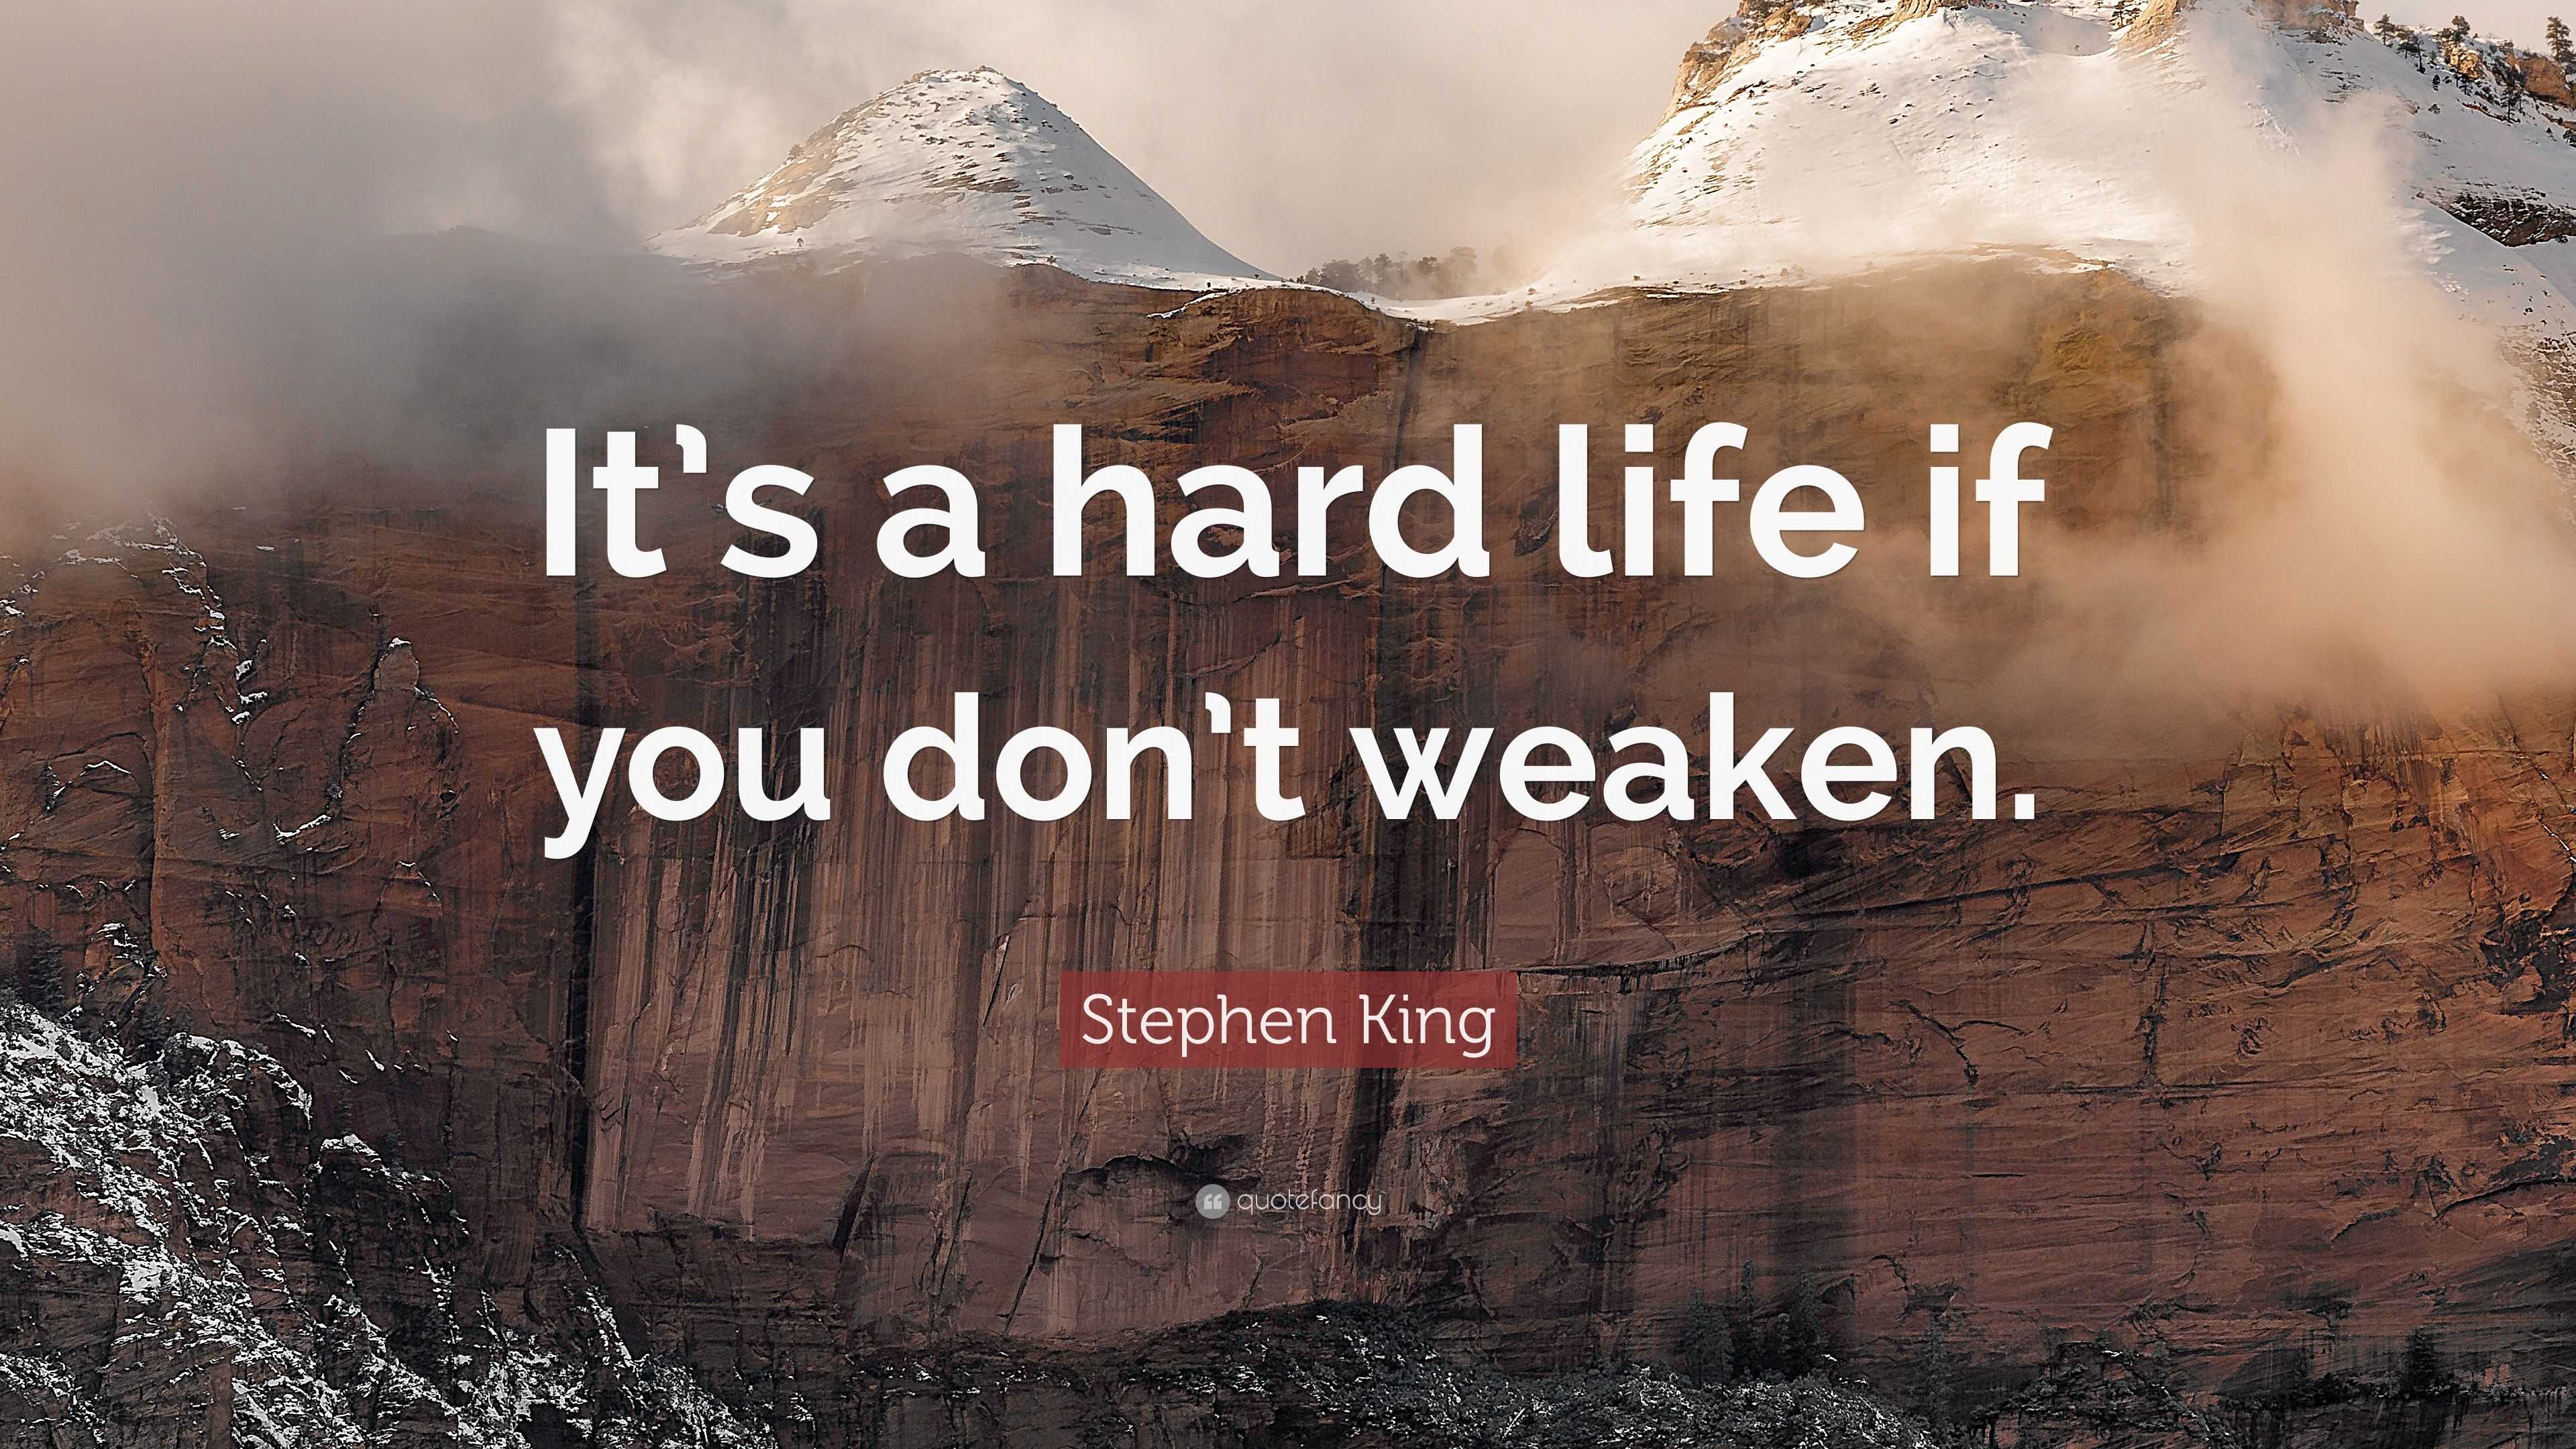 Stephen King Quote “It s a hard life if you don t weaken